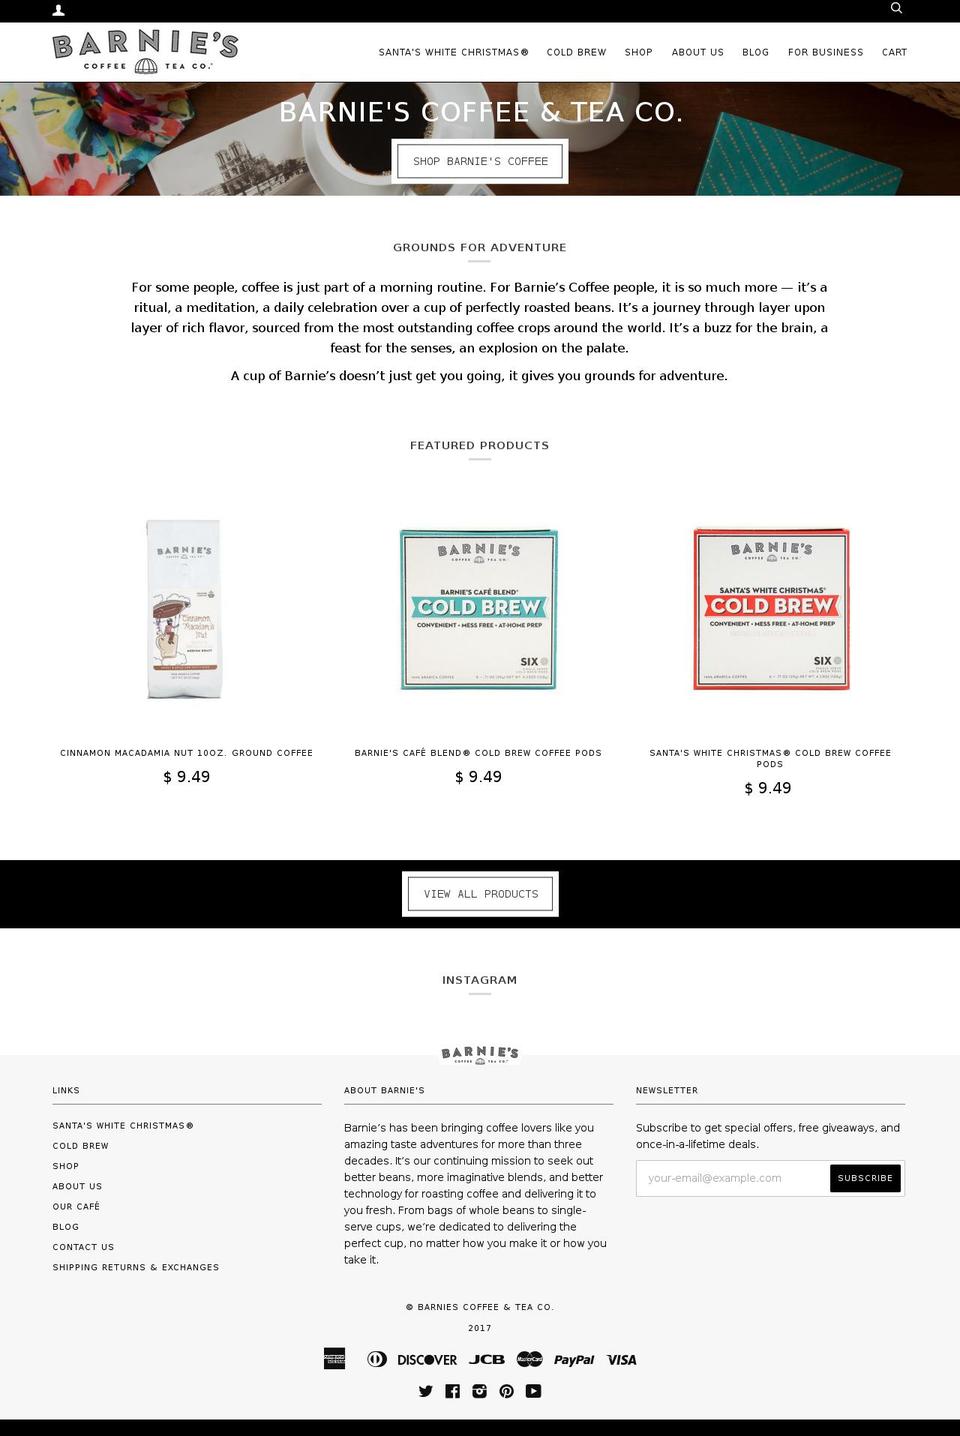 Shapes Shopify theme site example barniescoffee.com